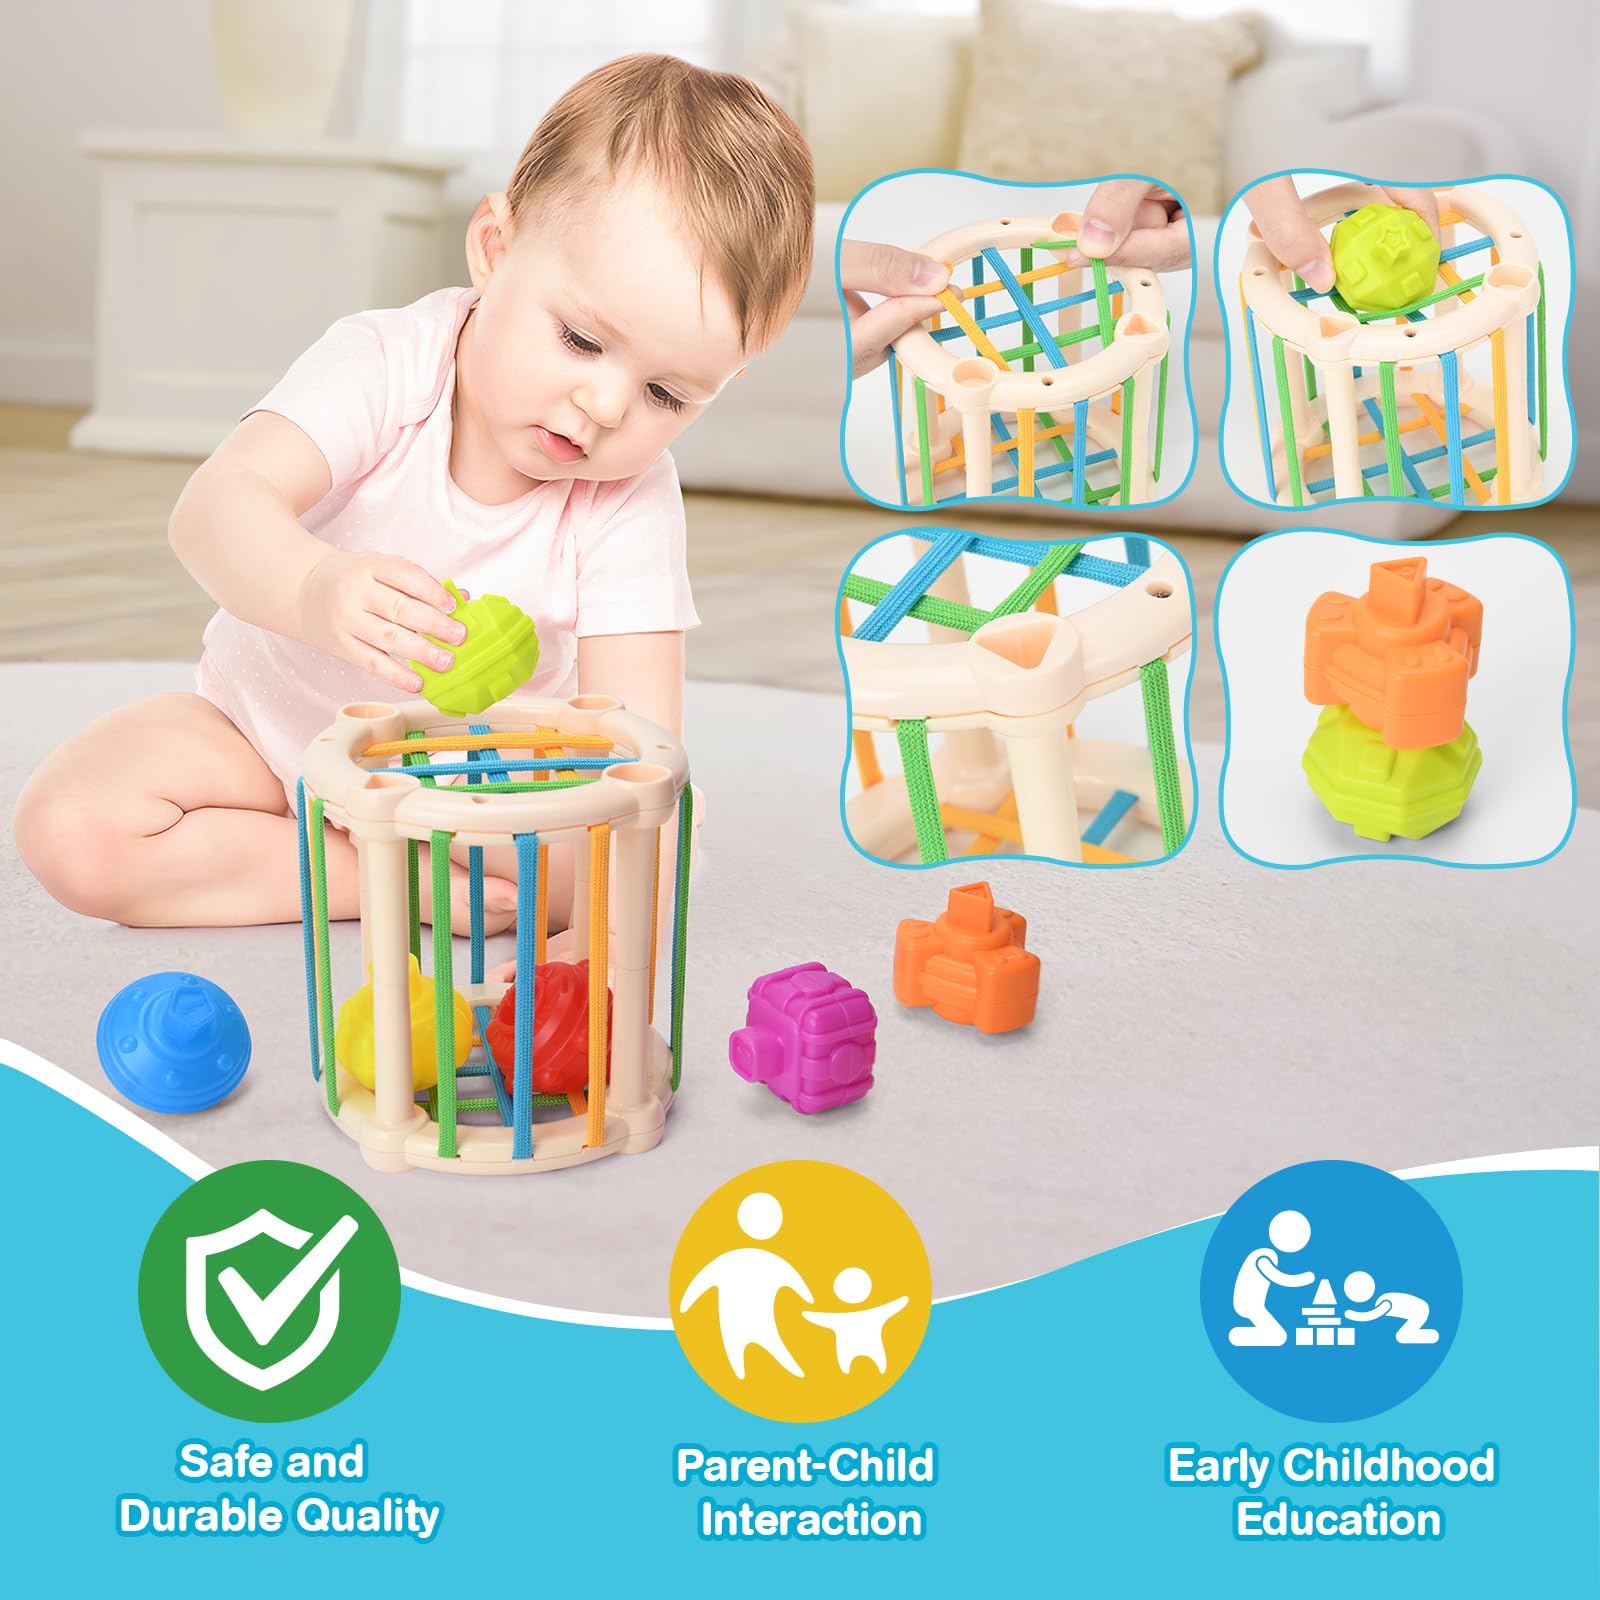 Balnore 6 in 1 Baby Toys 6 to 36 Months, 26pcs Montessori Toy, Identification Cloth Book, Infant Gifts Play Set Kids Sensory Learning Activity Infant Bath Time Fun for 1-4 Year Old Birthday Box